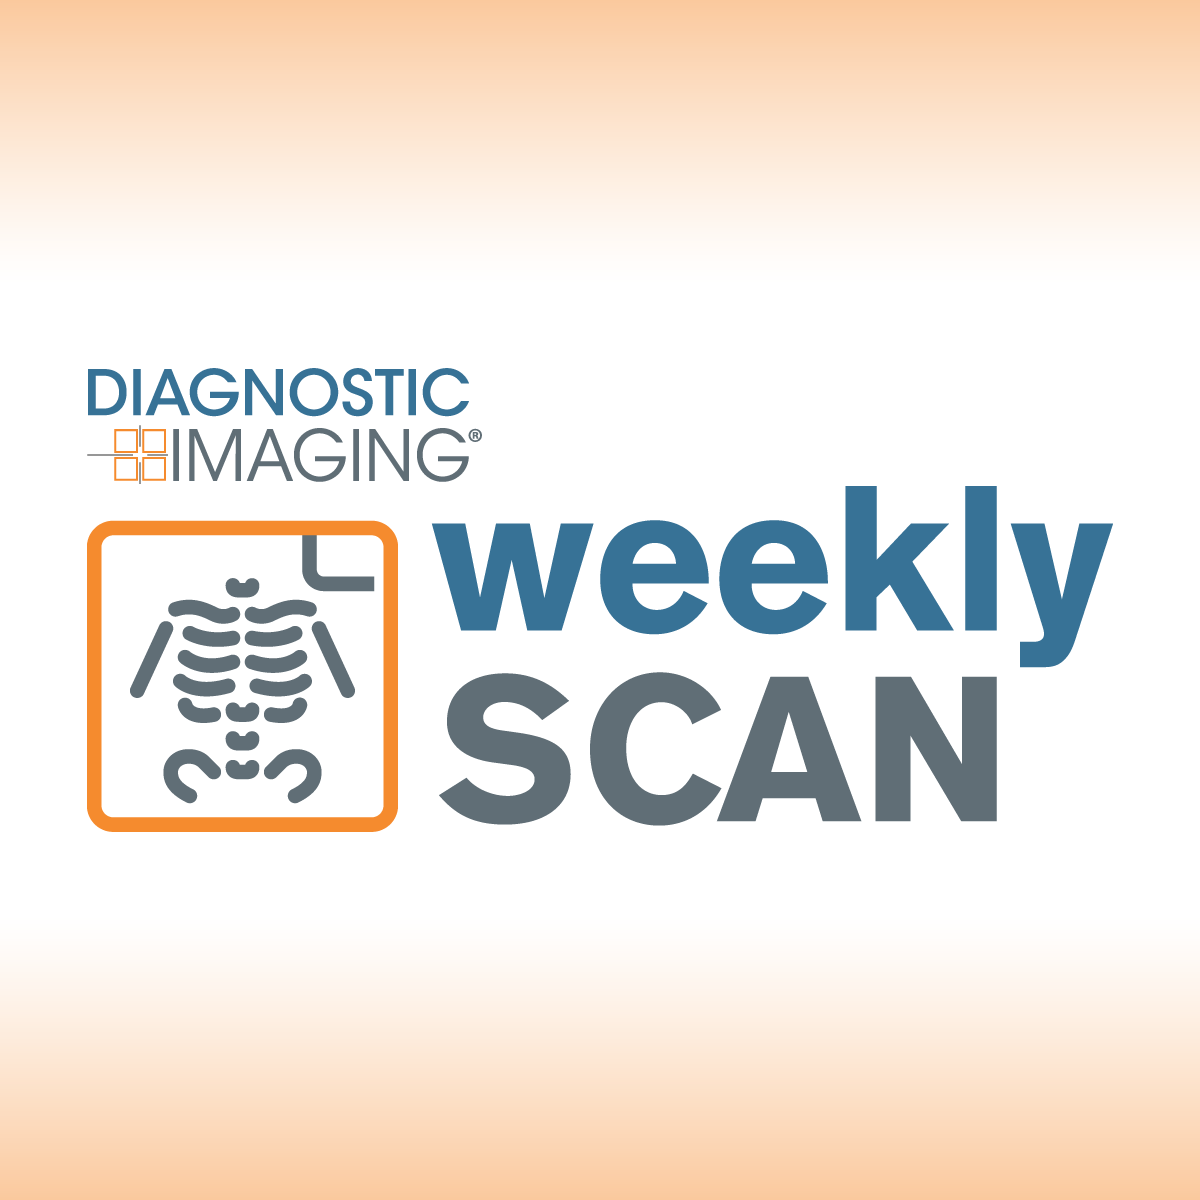 Diagnostic Imaging's Weekly Scan: March 10-March 16